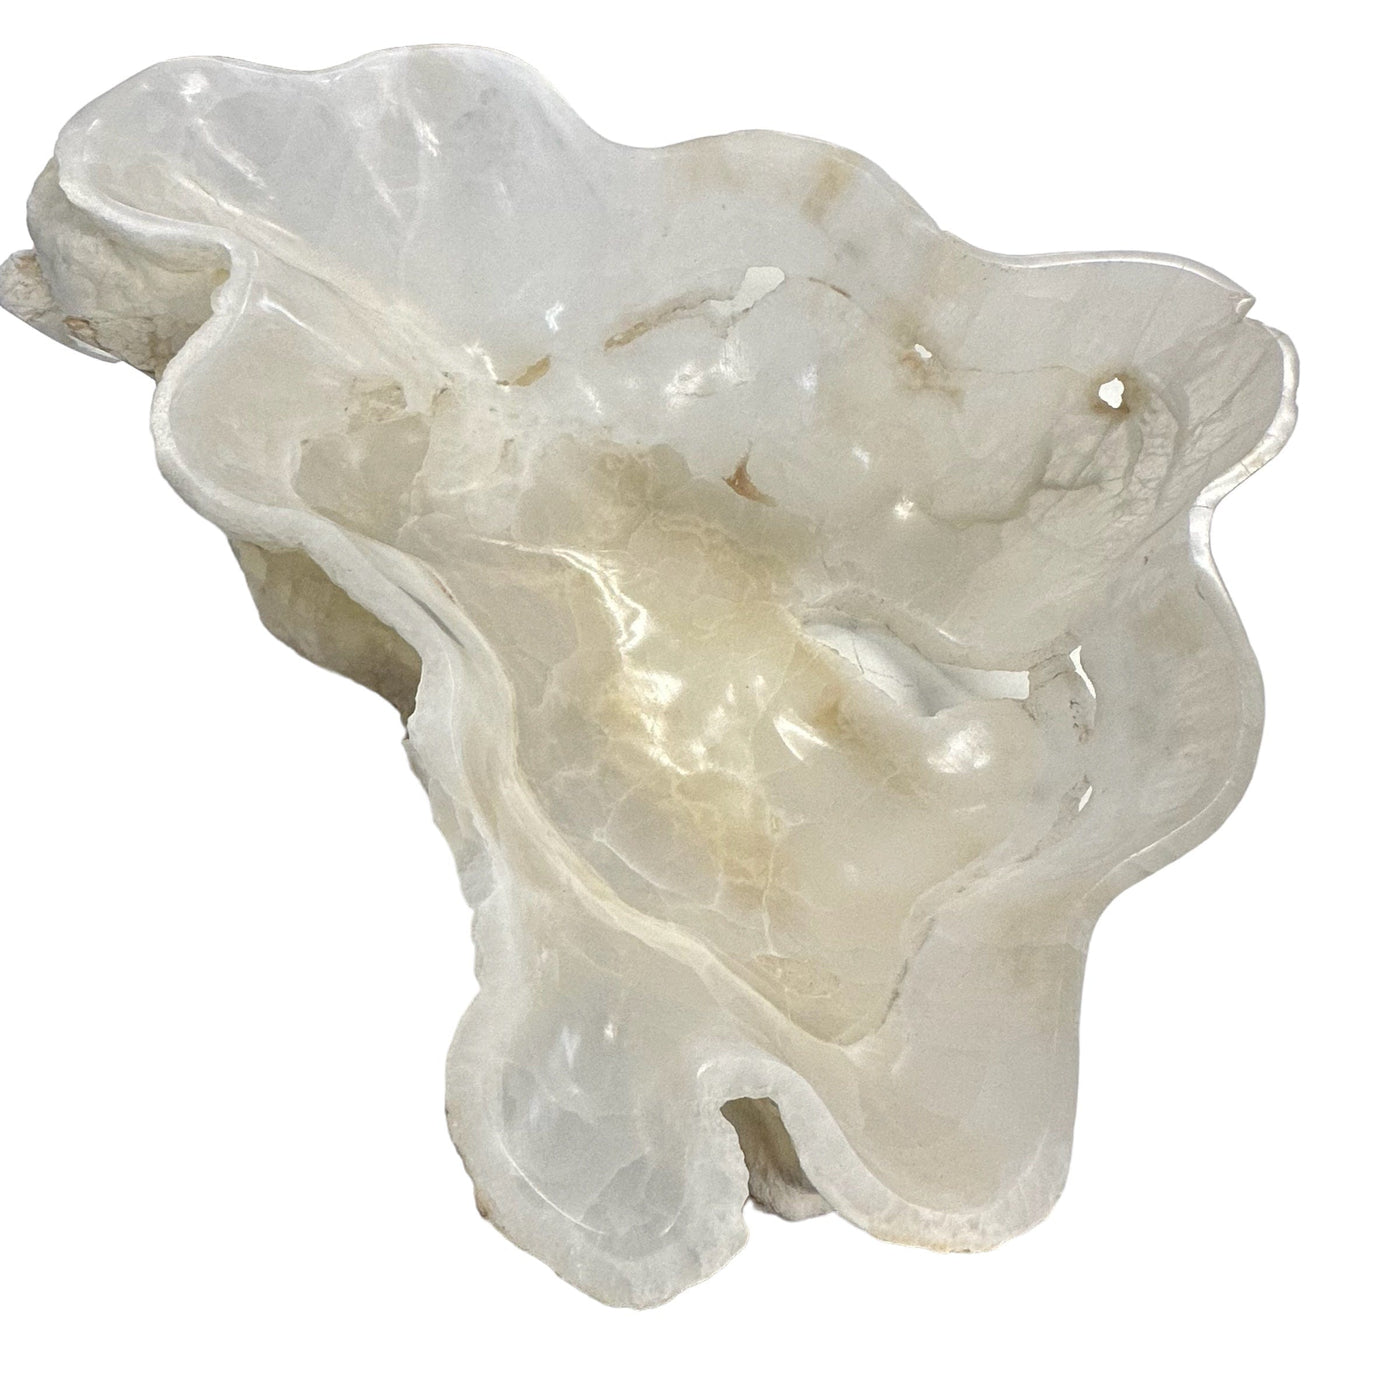 Light Colored Mexican Onyx Freeform Bowl - Large Bowl 